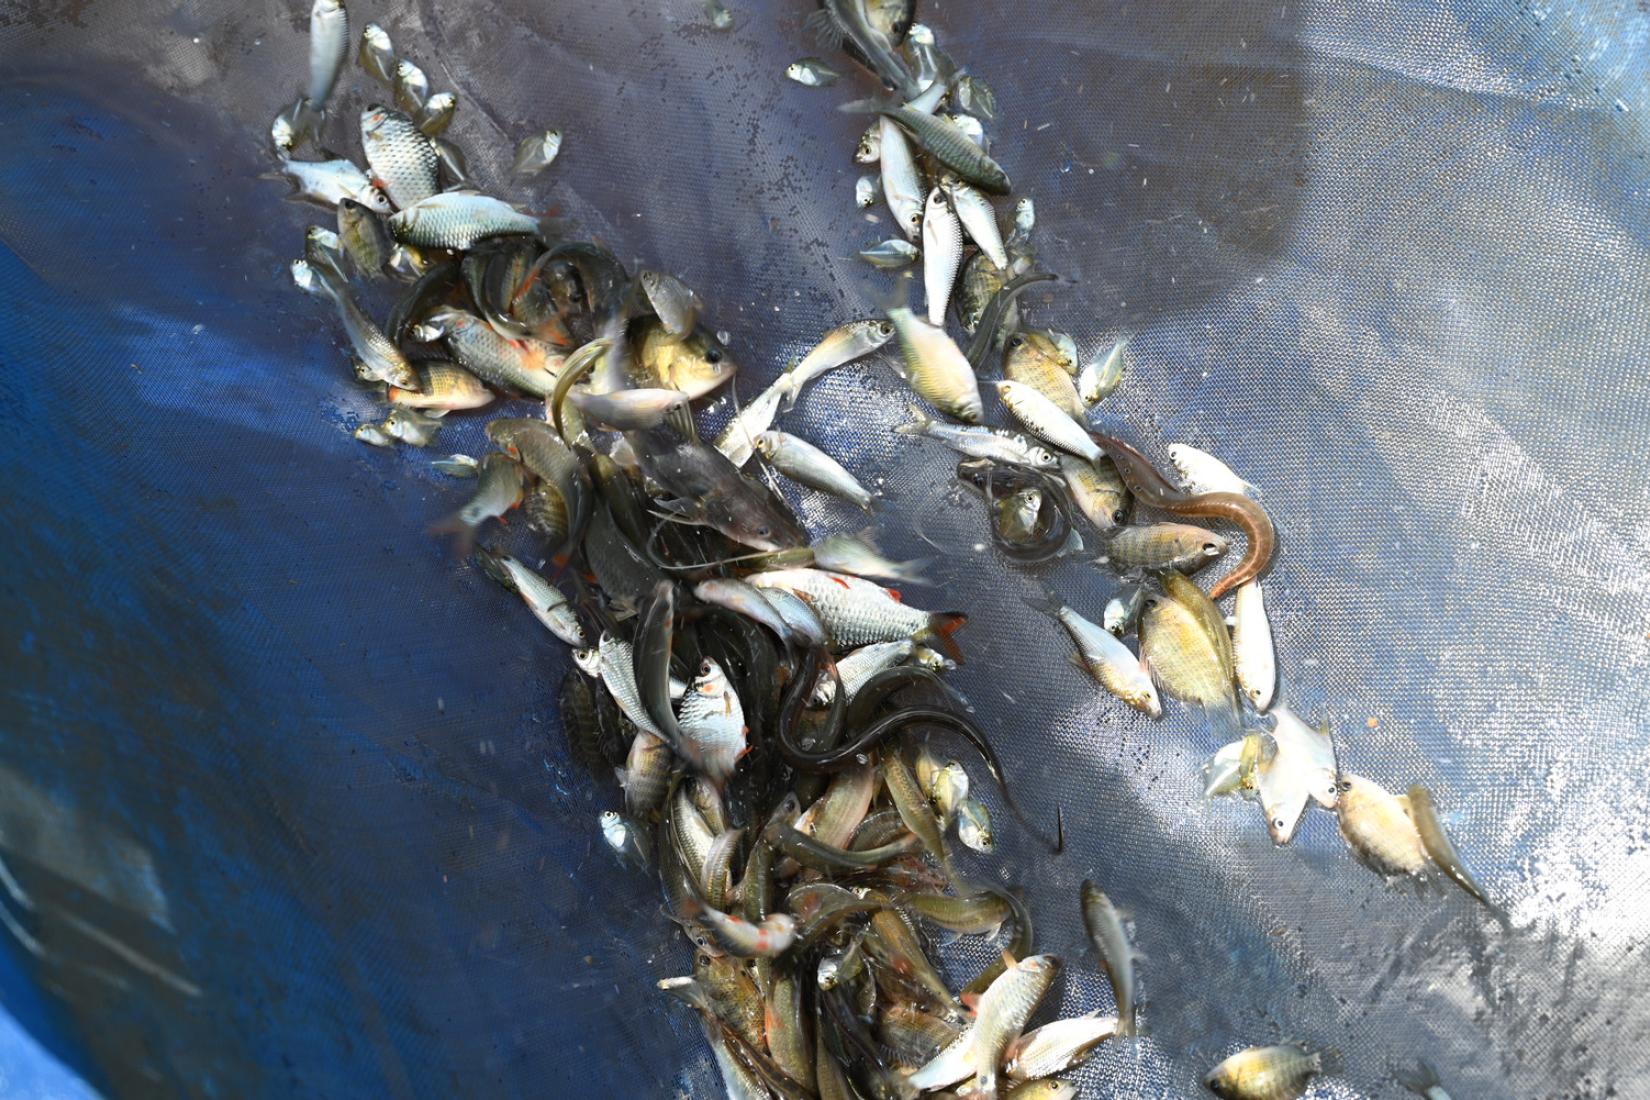 Wild-caught fish, especially small-bodied species, are a vital food source for rural Cambodian communities, providing essential nutrients and protein for families, particularly pregnant women and children.